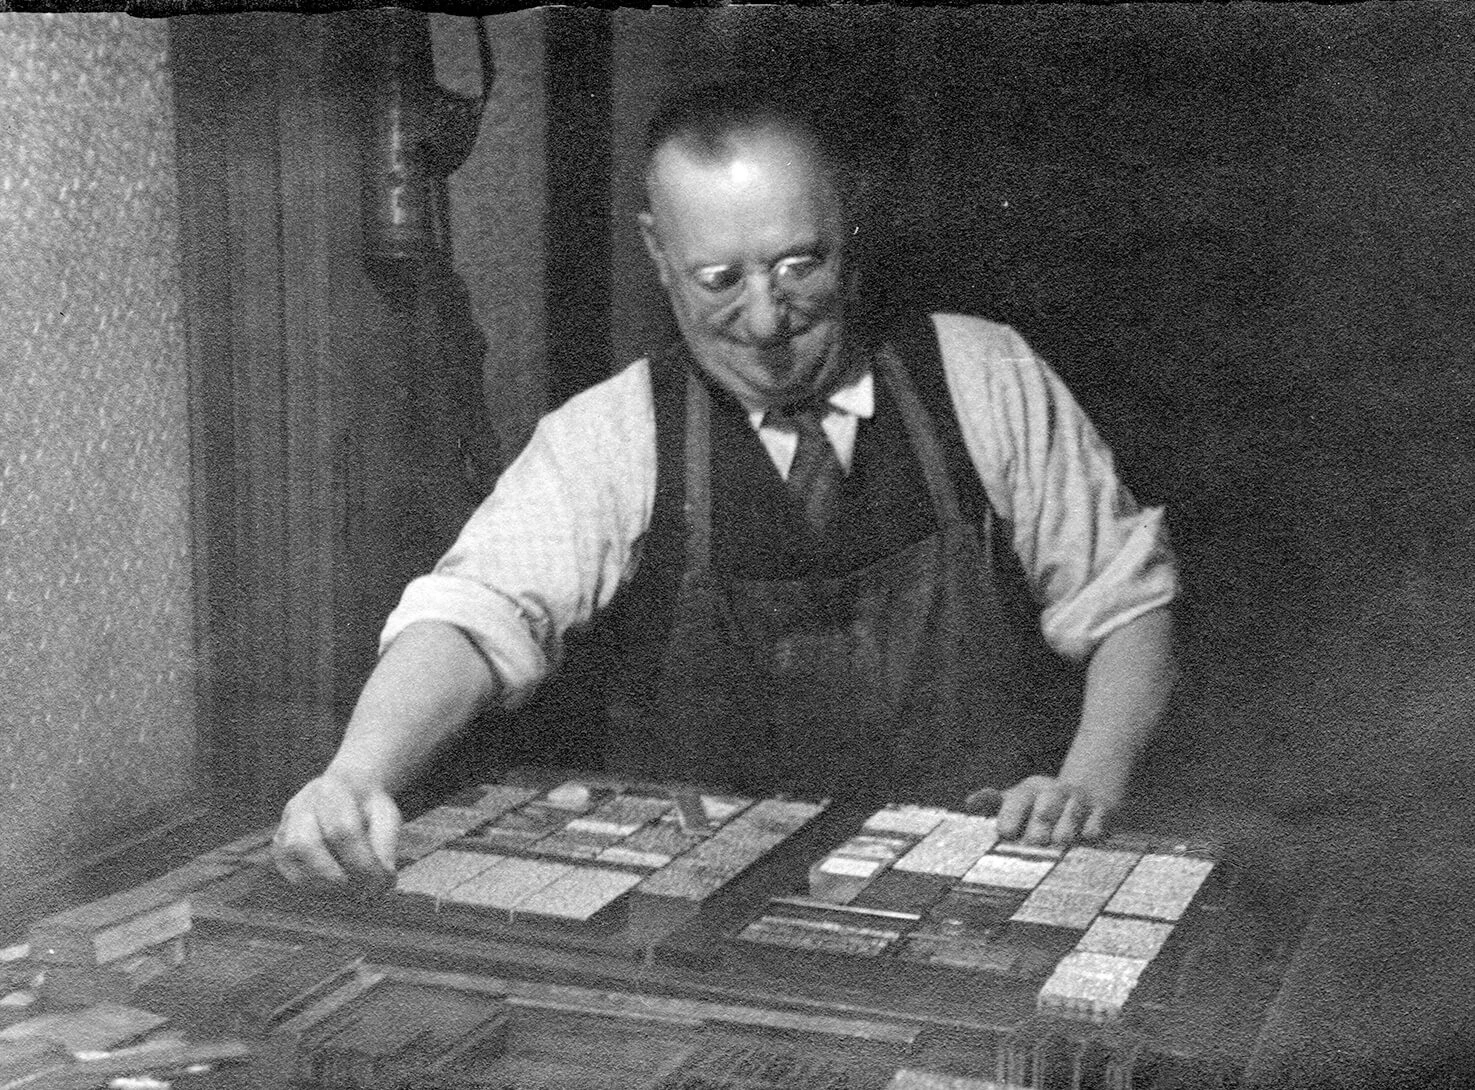 Black and white photo of a man wearing glasses and an apron, setting the type in a printing press